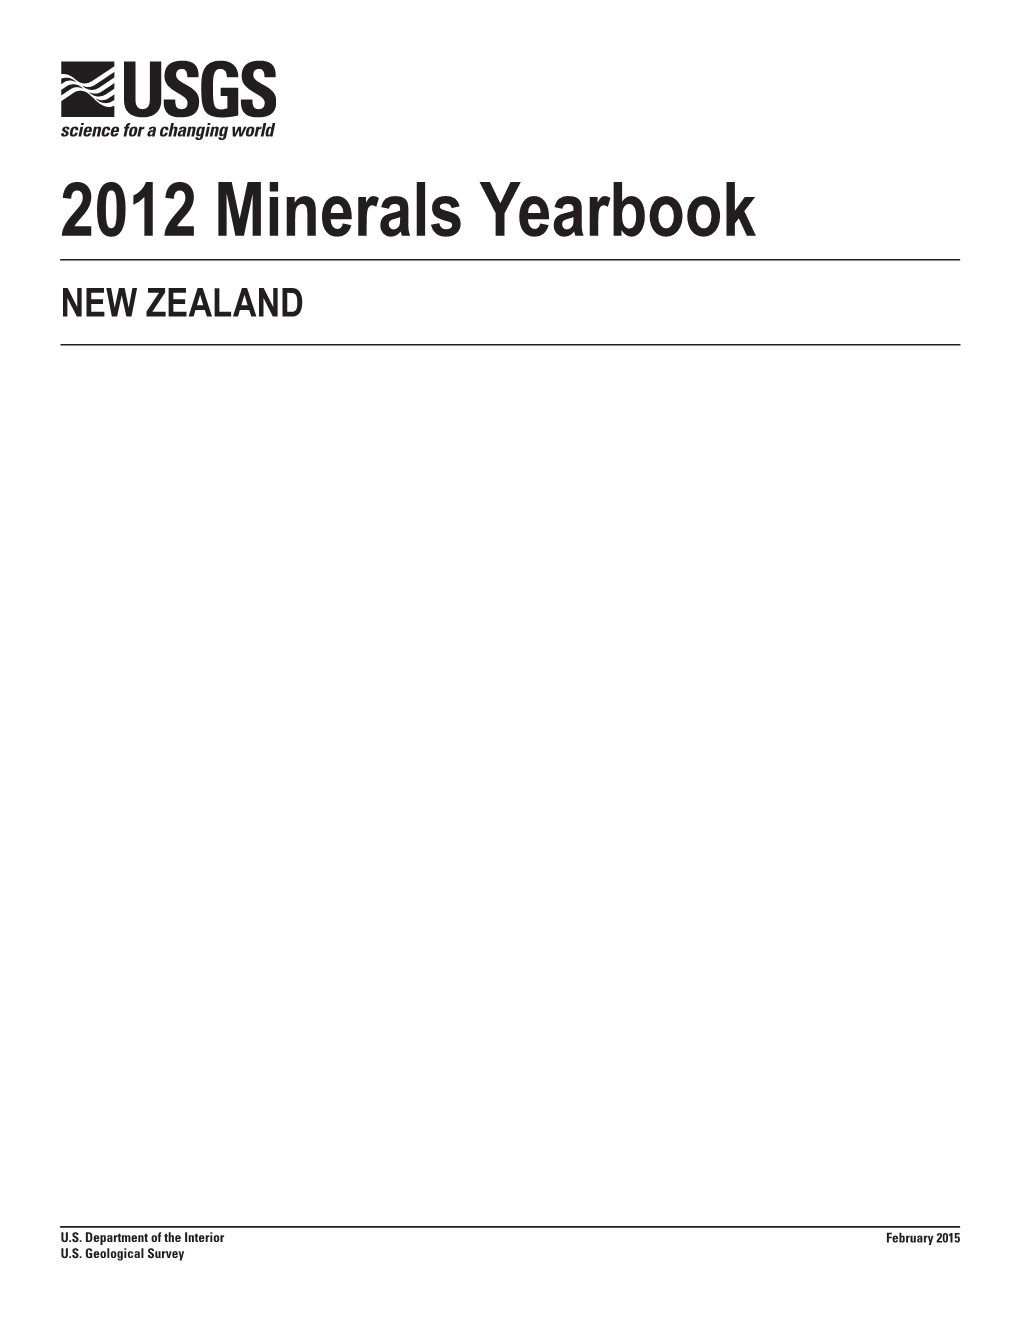 The Mineral Industry of New Zealand in 2012